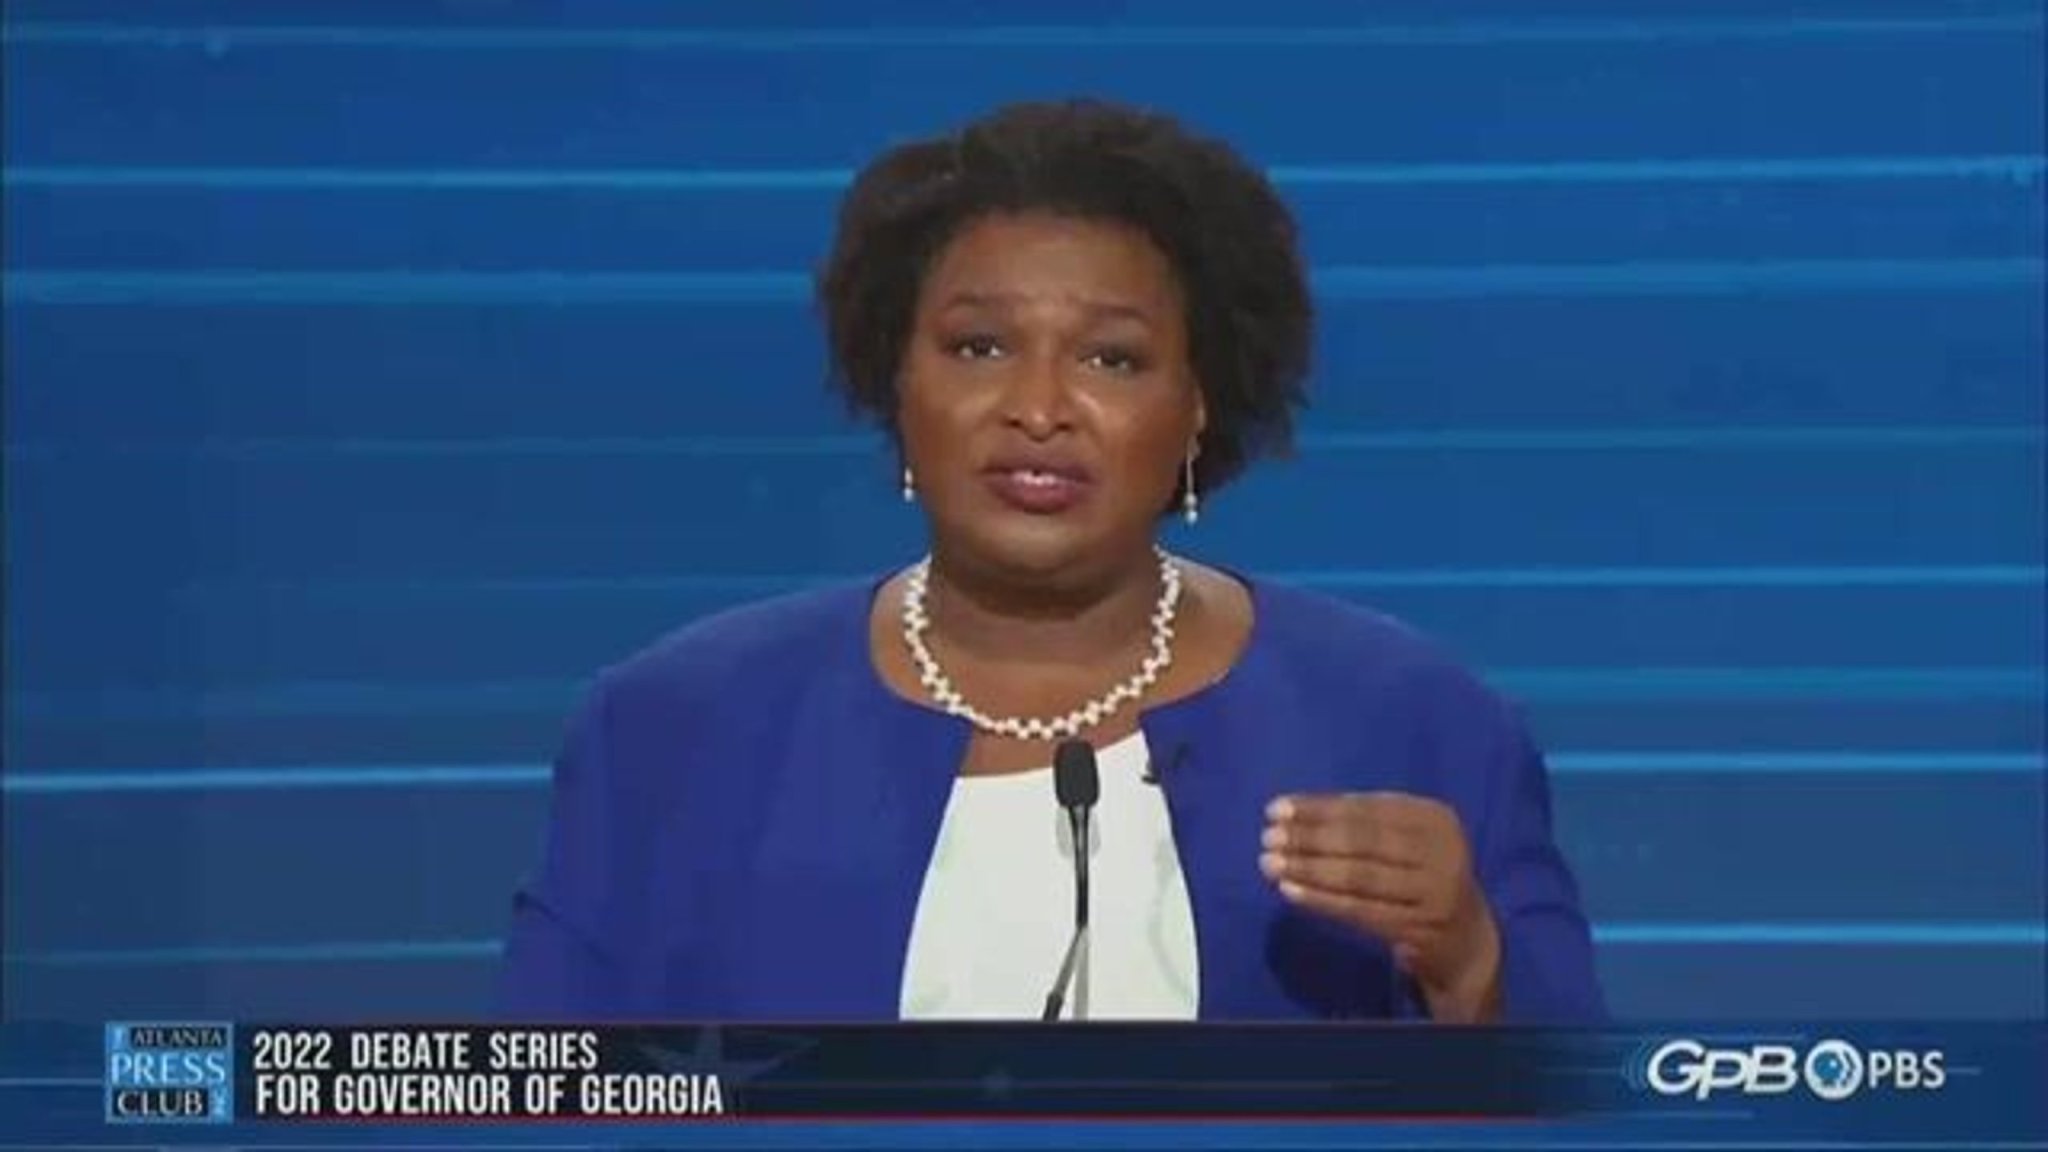 Stacey Abrams (D) notes the state’s revenue is dependent on "money delivered by federal Democrats."